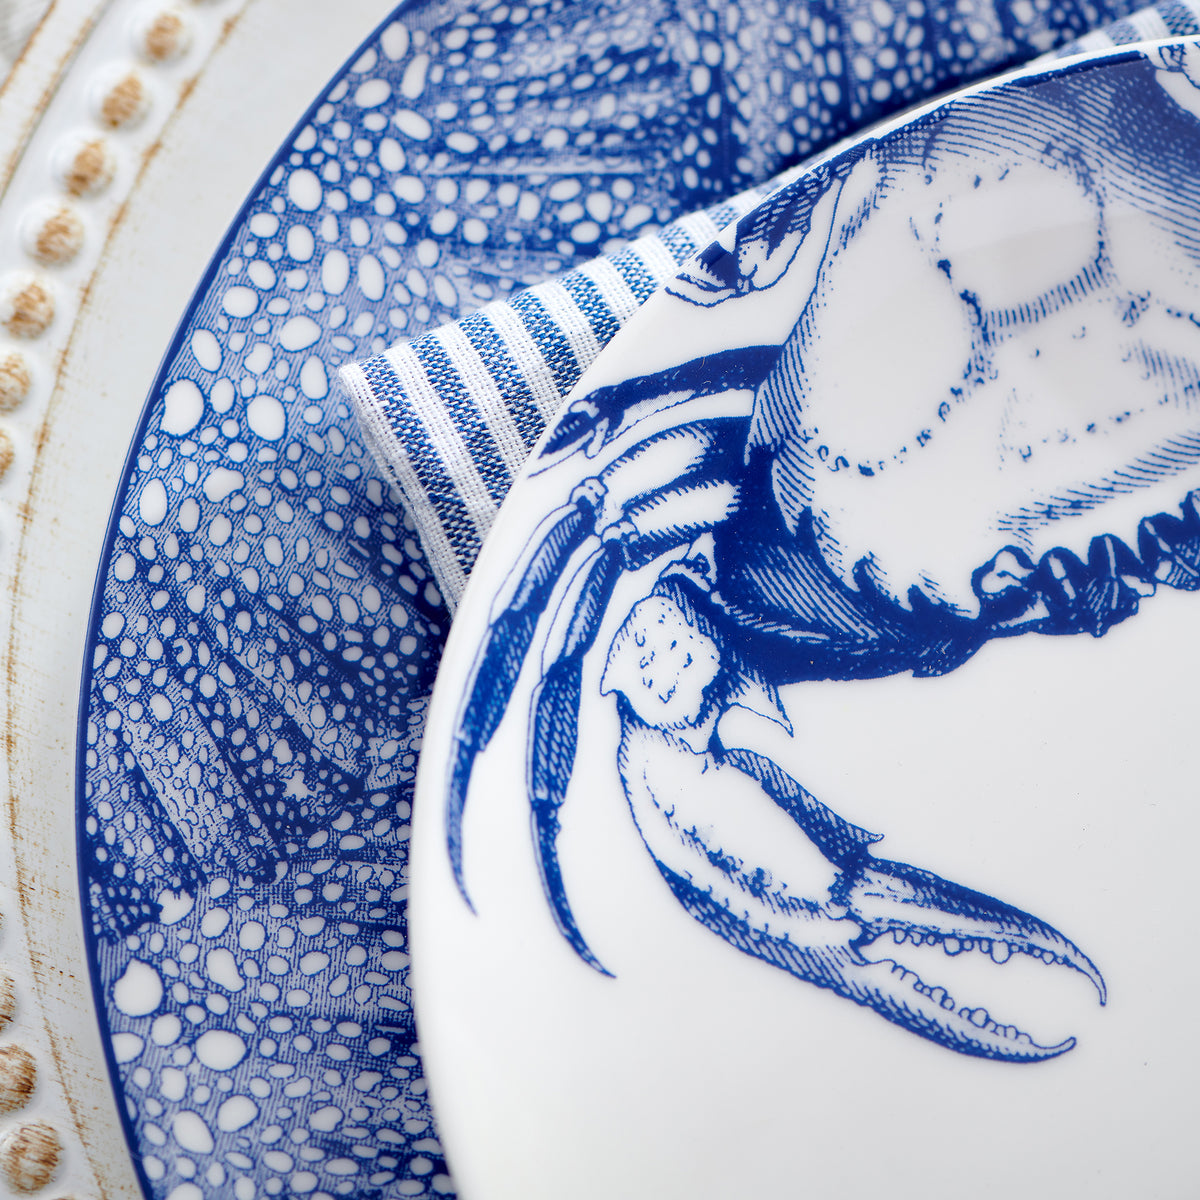 Close-up of a blue and white ceramic plate with a crab pattern, placed on a larger decorative blue and white plate, with a striped napkin in between. The heirloom-quality Crab Small Plates by Caskata Artisanal Home exude elegance and charm.